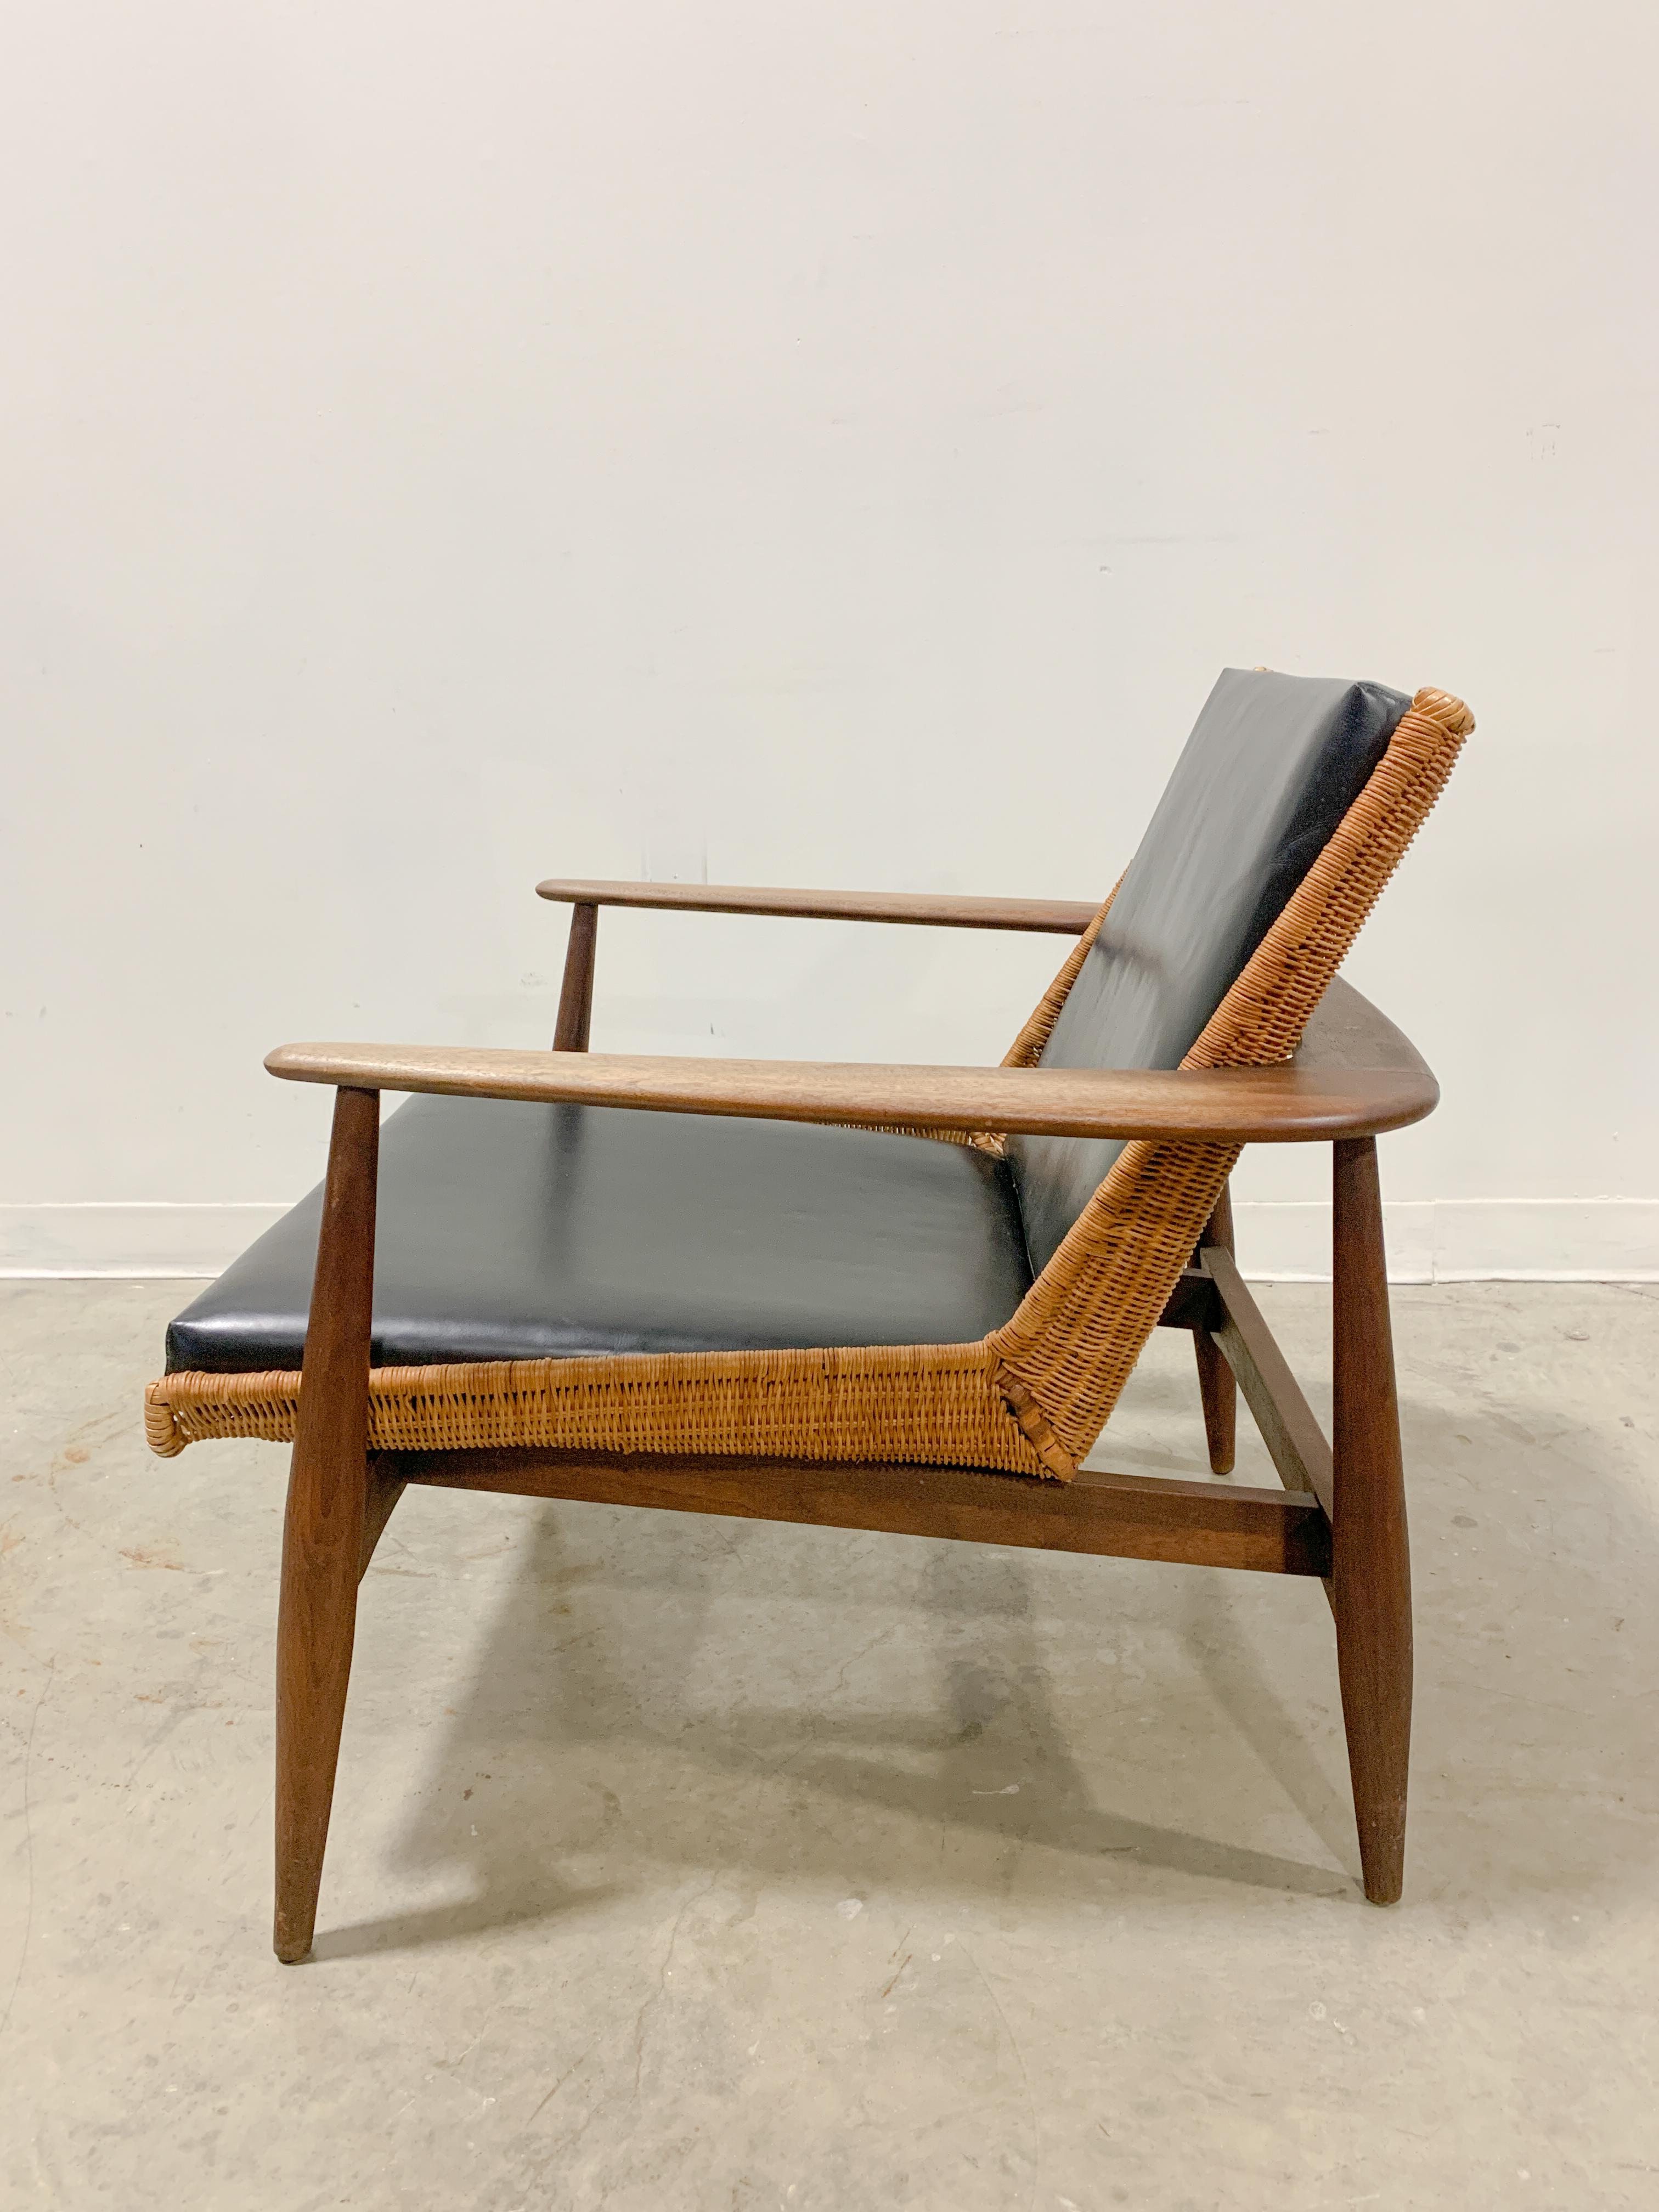 Rare solid walnut version of Lawrence Peabody's stunning model 1806 / 917 chair design made by Richardson Nemschoff in the early 1960s. Unique wraparound arm design cradles a woven basket shell seat that was sourced directly from weavers in Hong